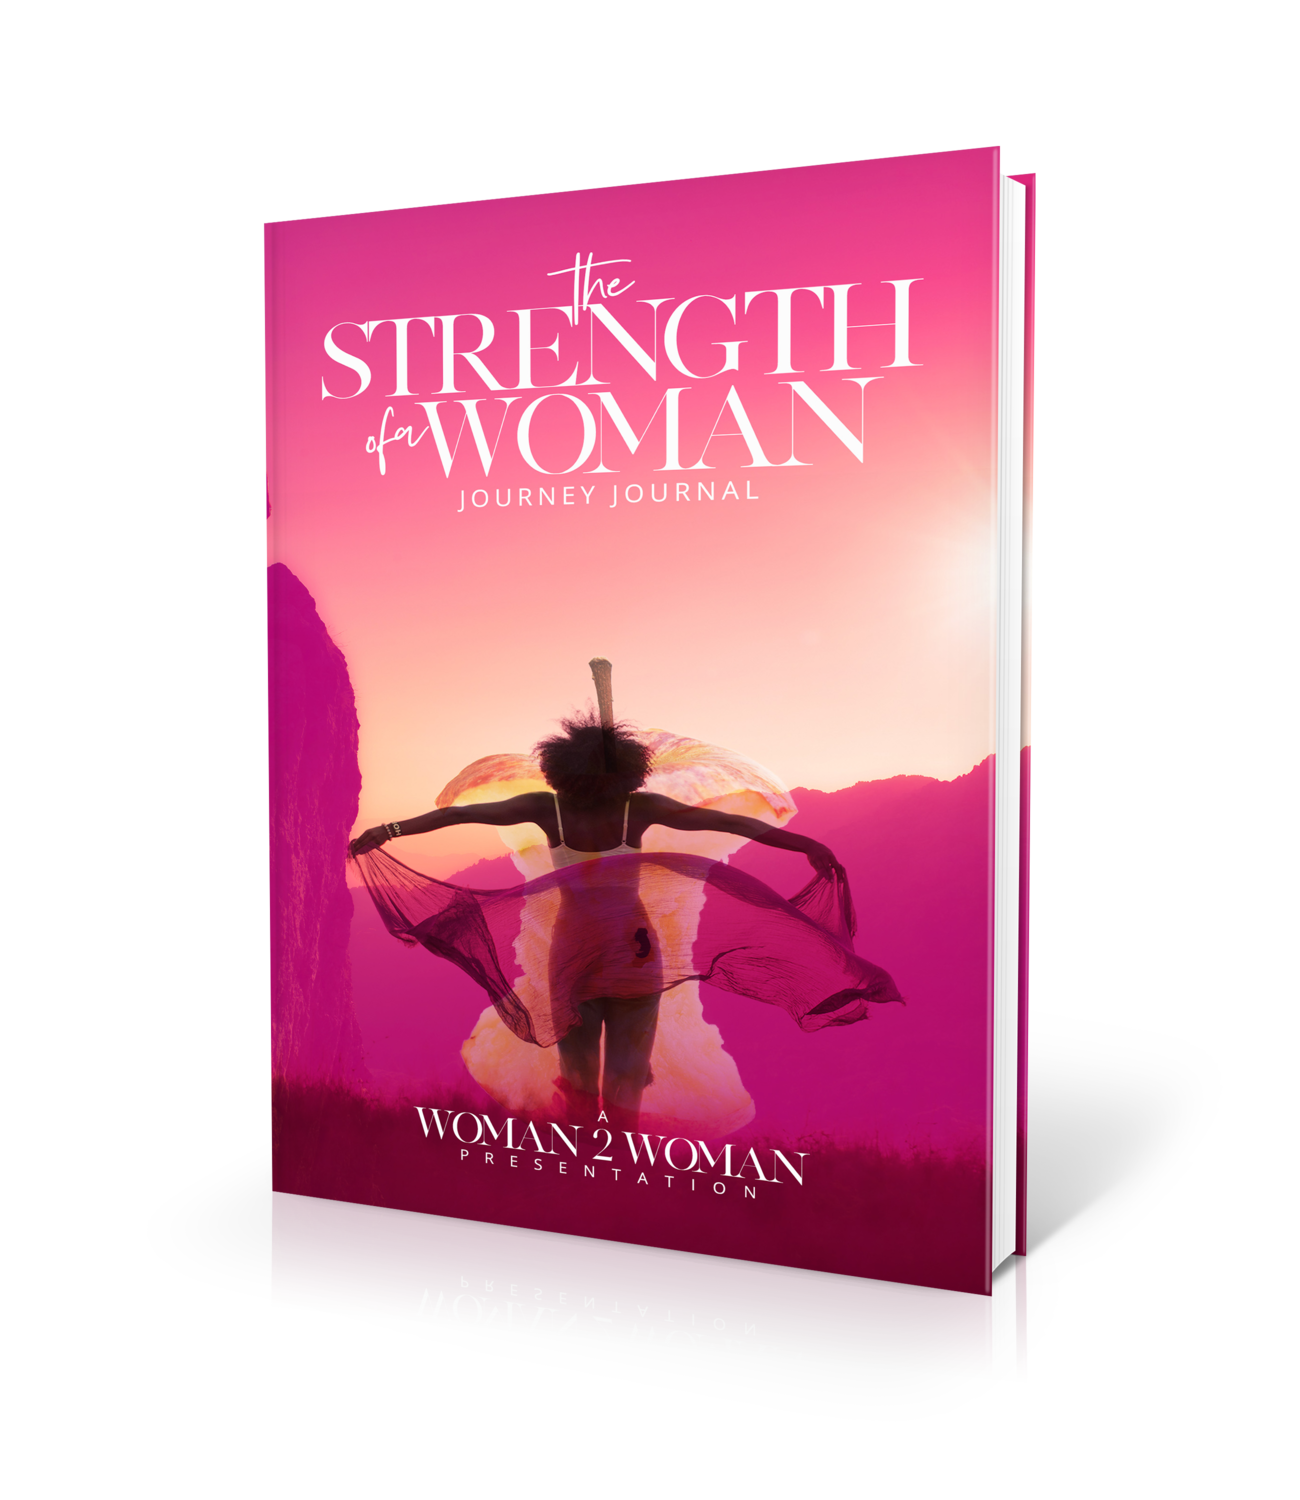 The Strength of a Woman Journey Journal